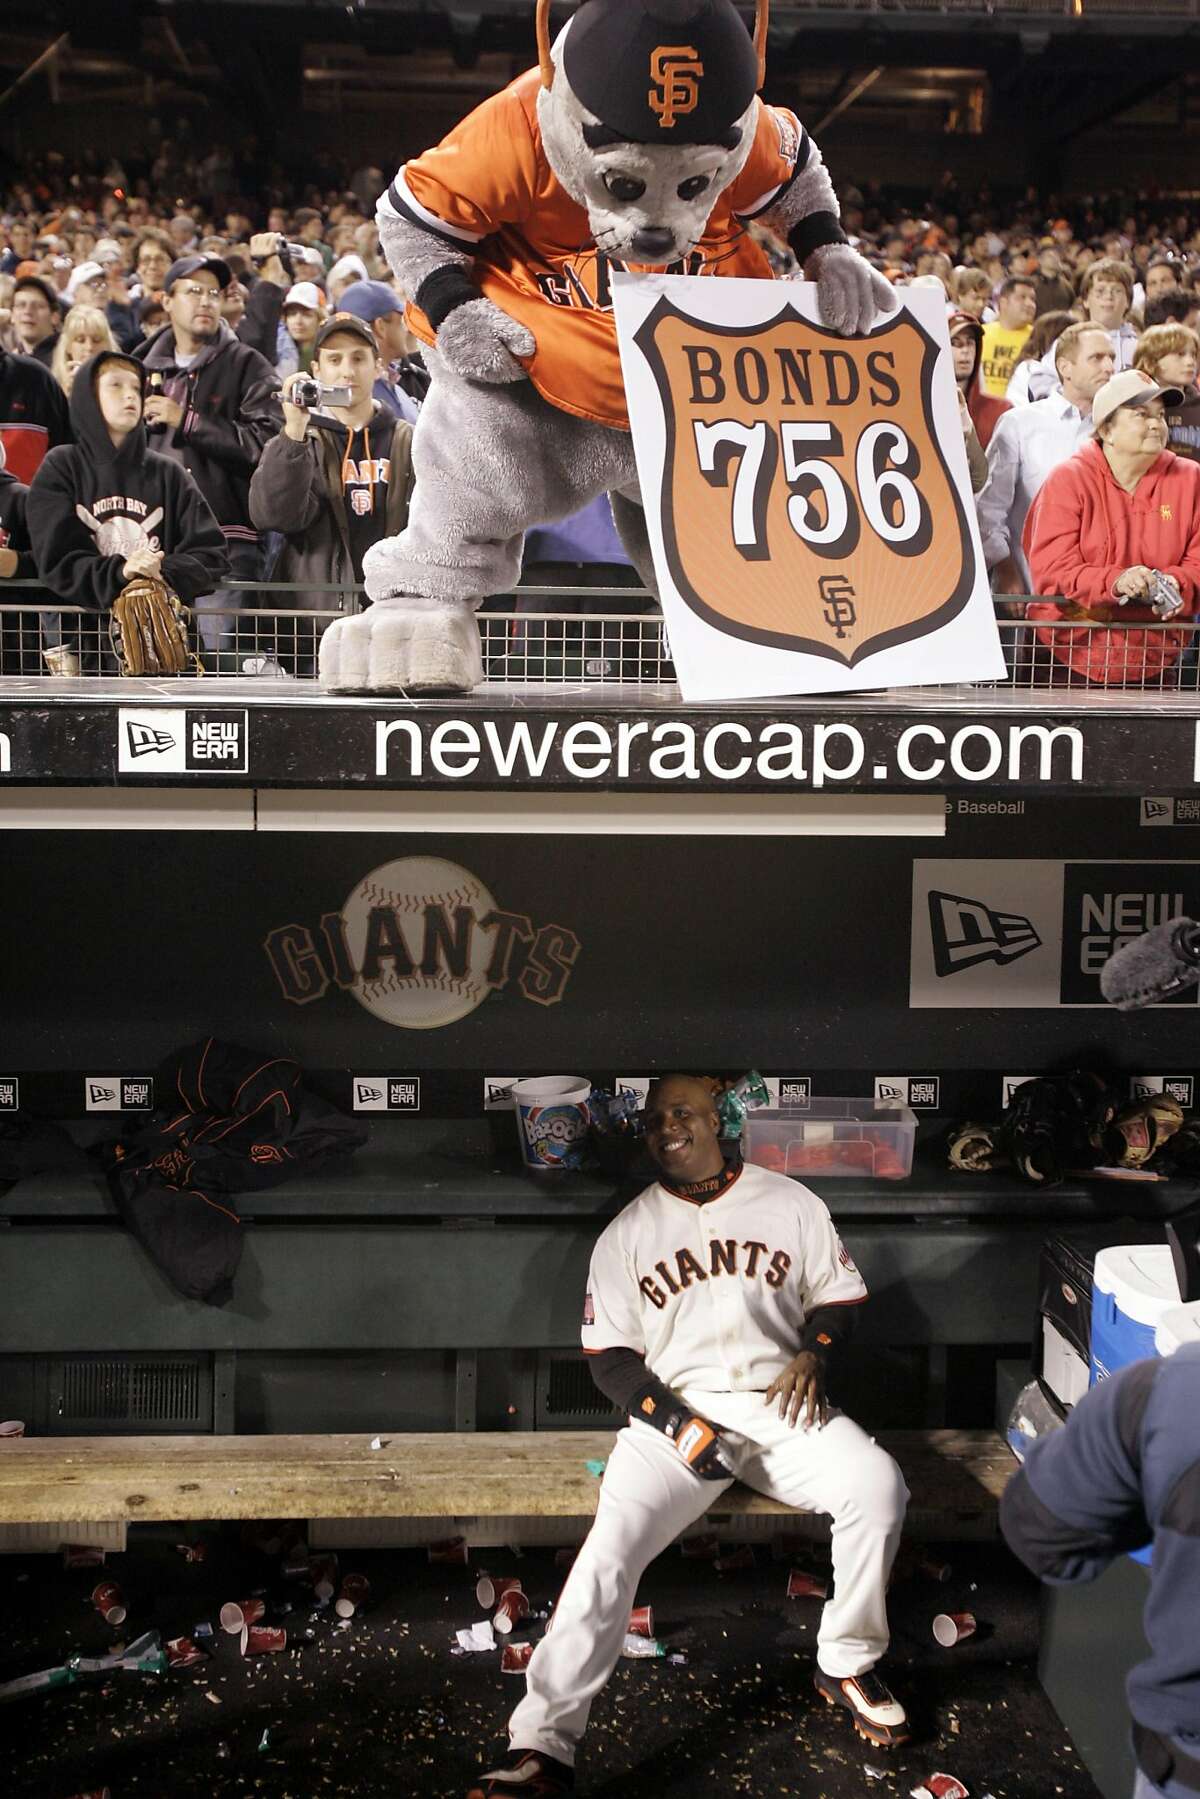 New Barry Bonds documentary to air on ESPN this Sunday - Bucs Dugout